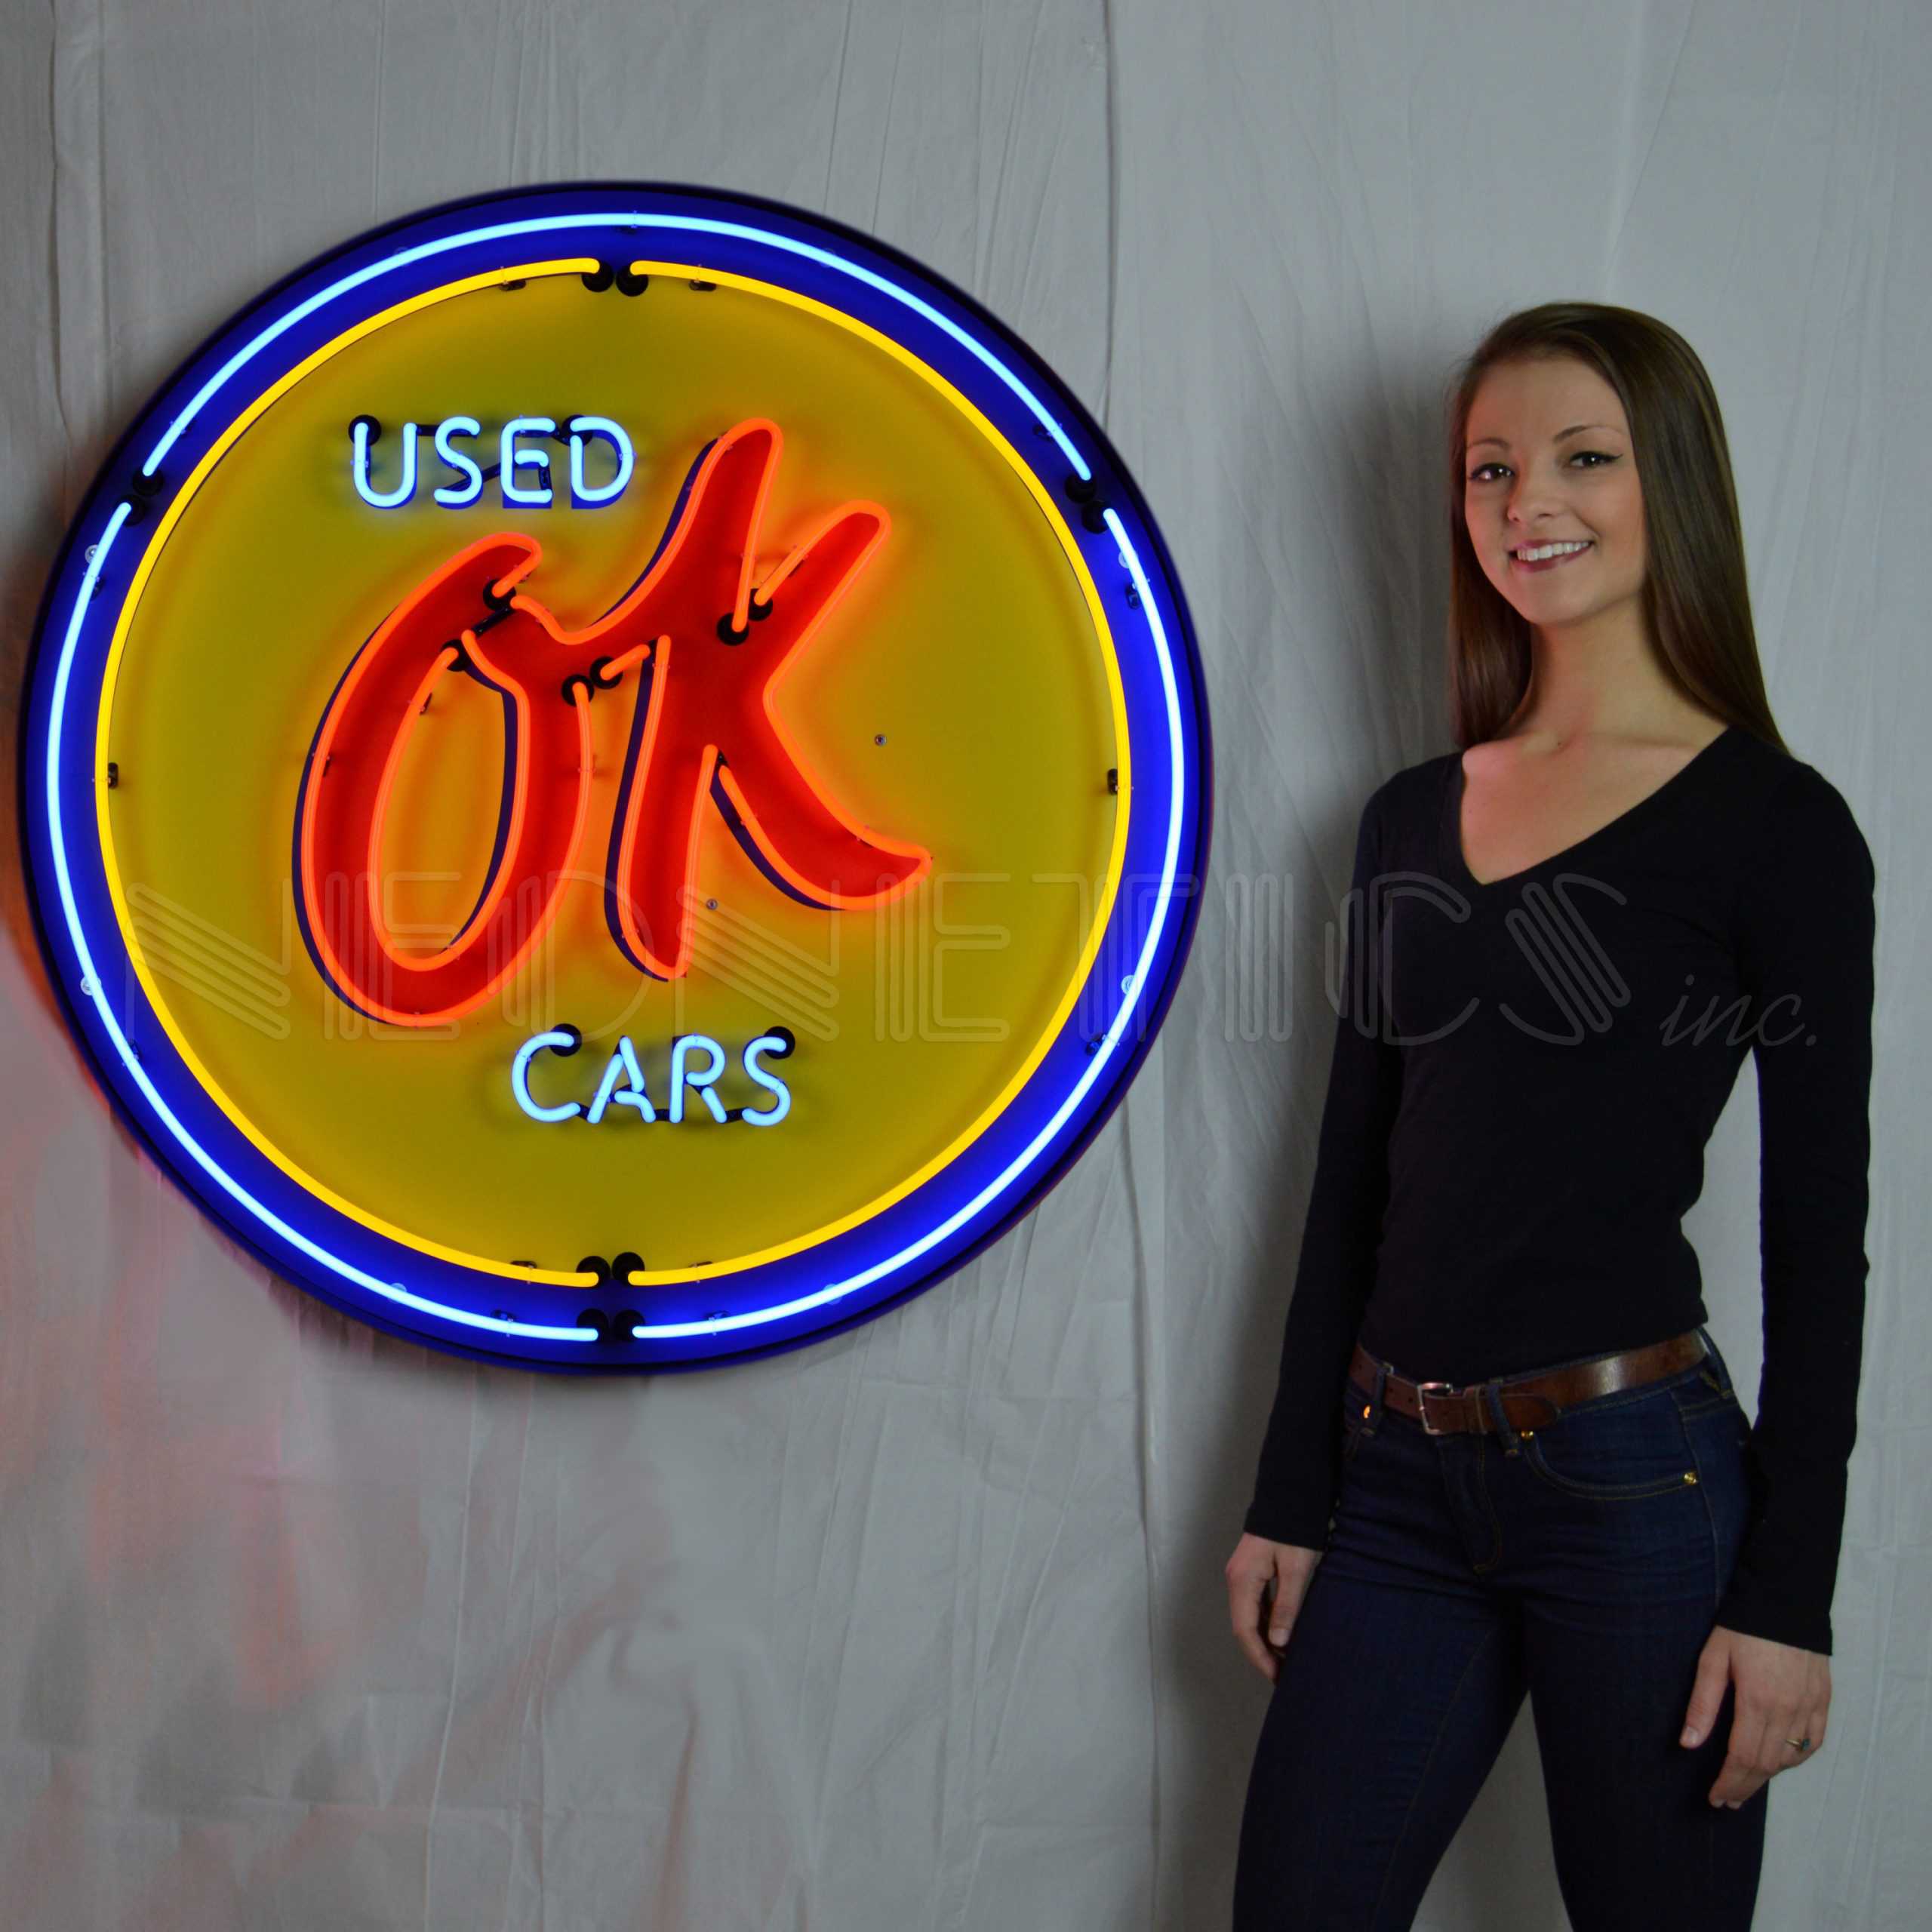 GM OK USED CARS 36 INCH NEON SIGN IN METAL CAN